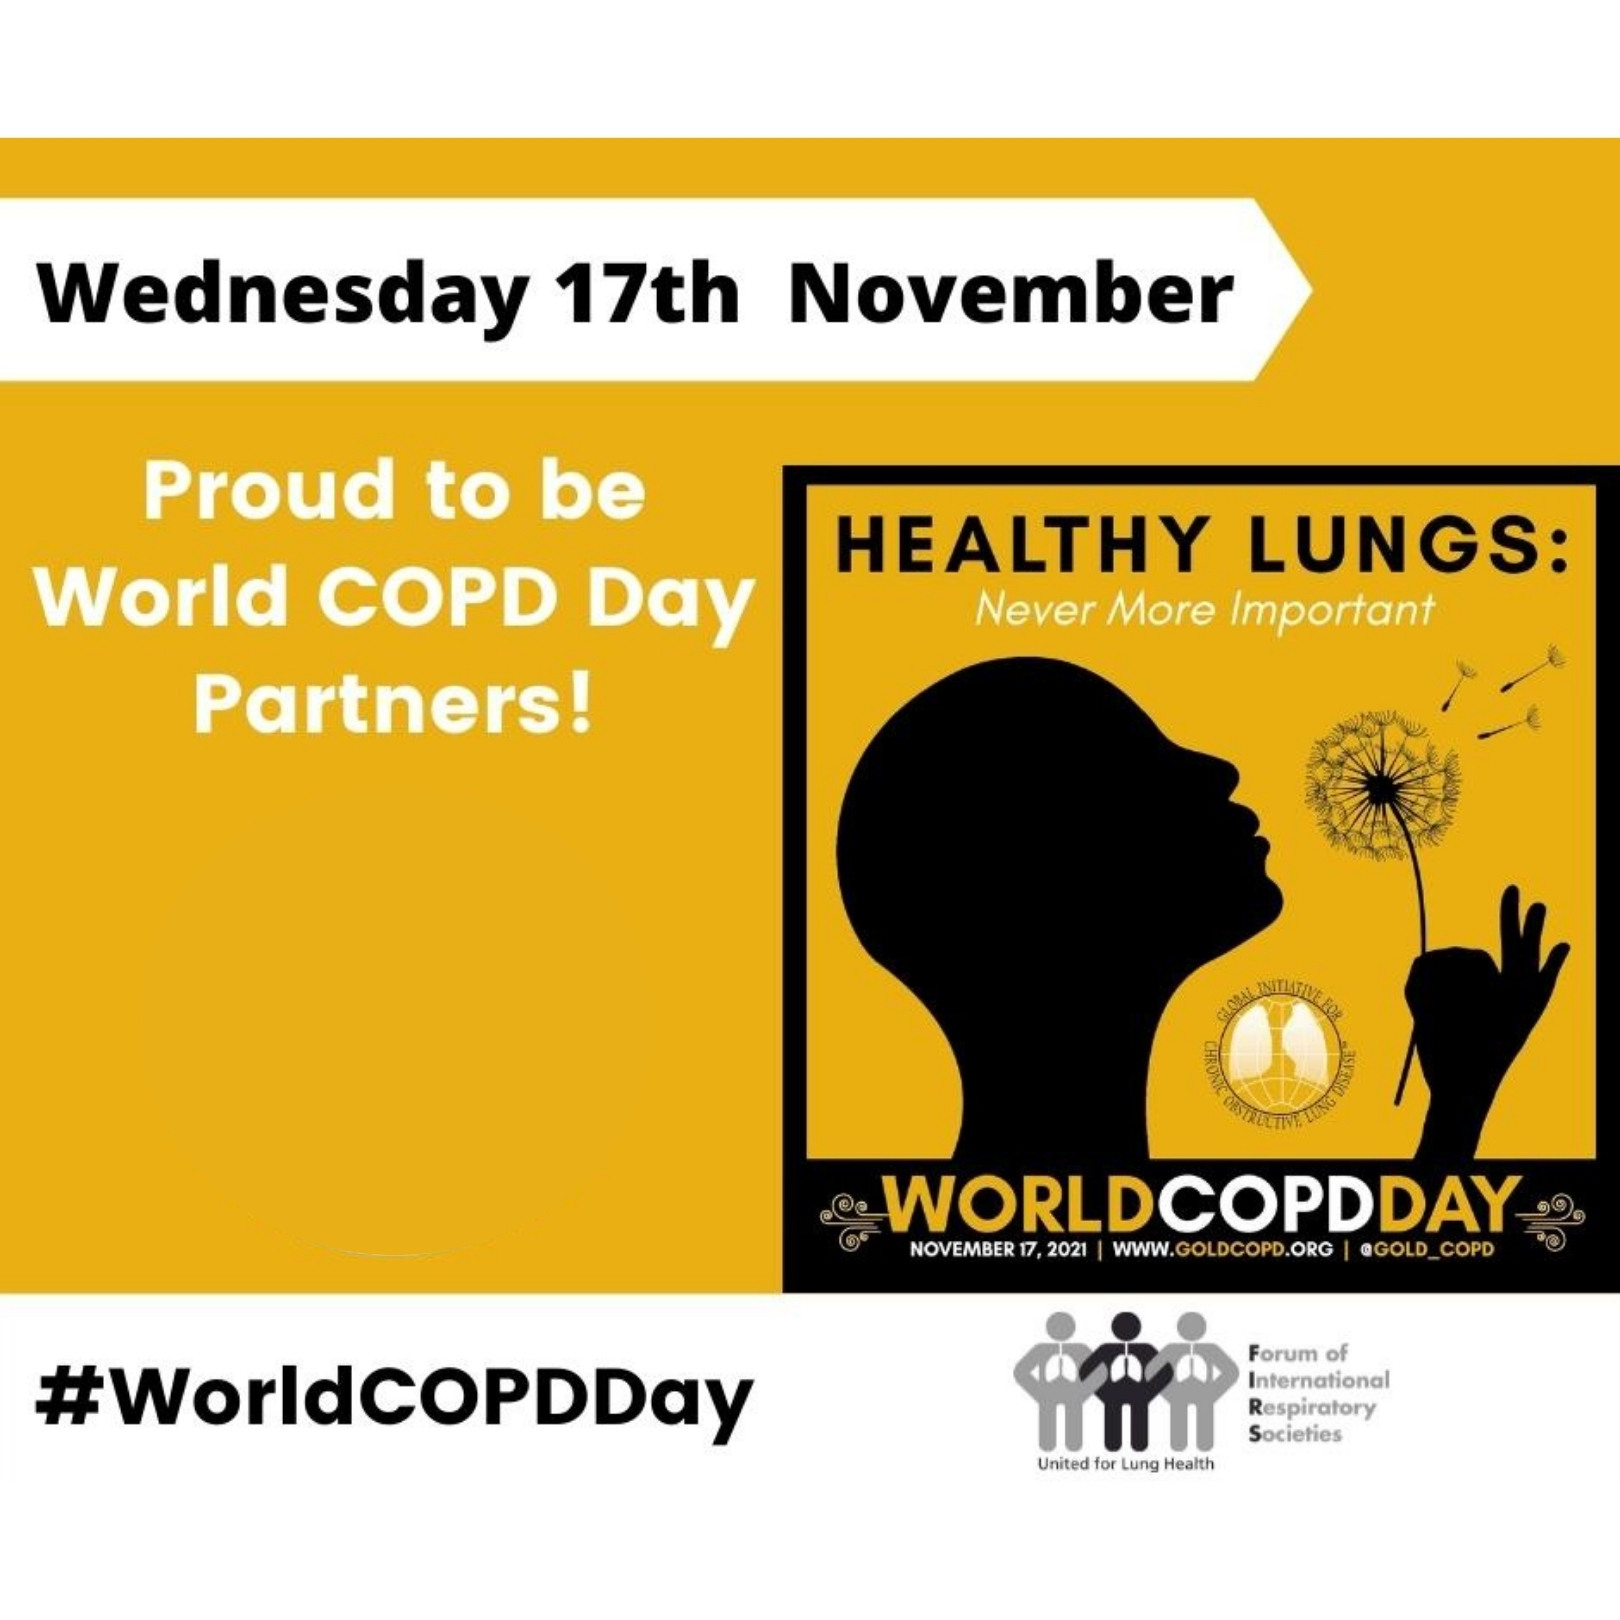 Healthy Lungs – Never More Important: World COPD Day